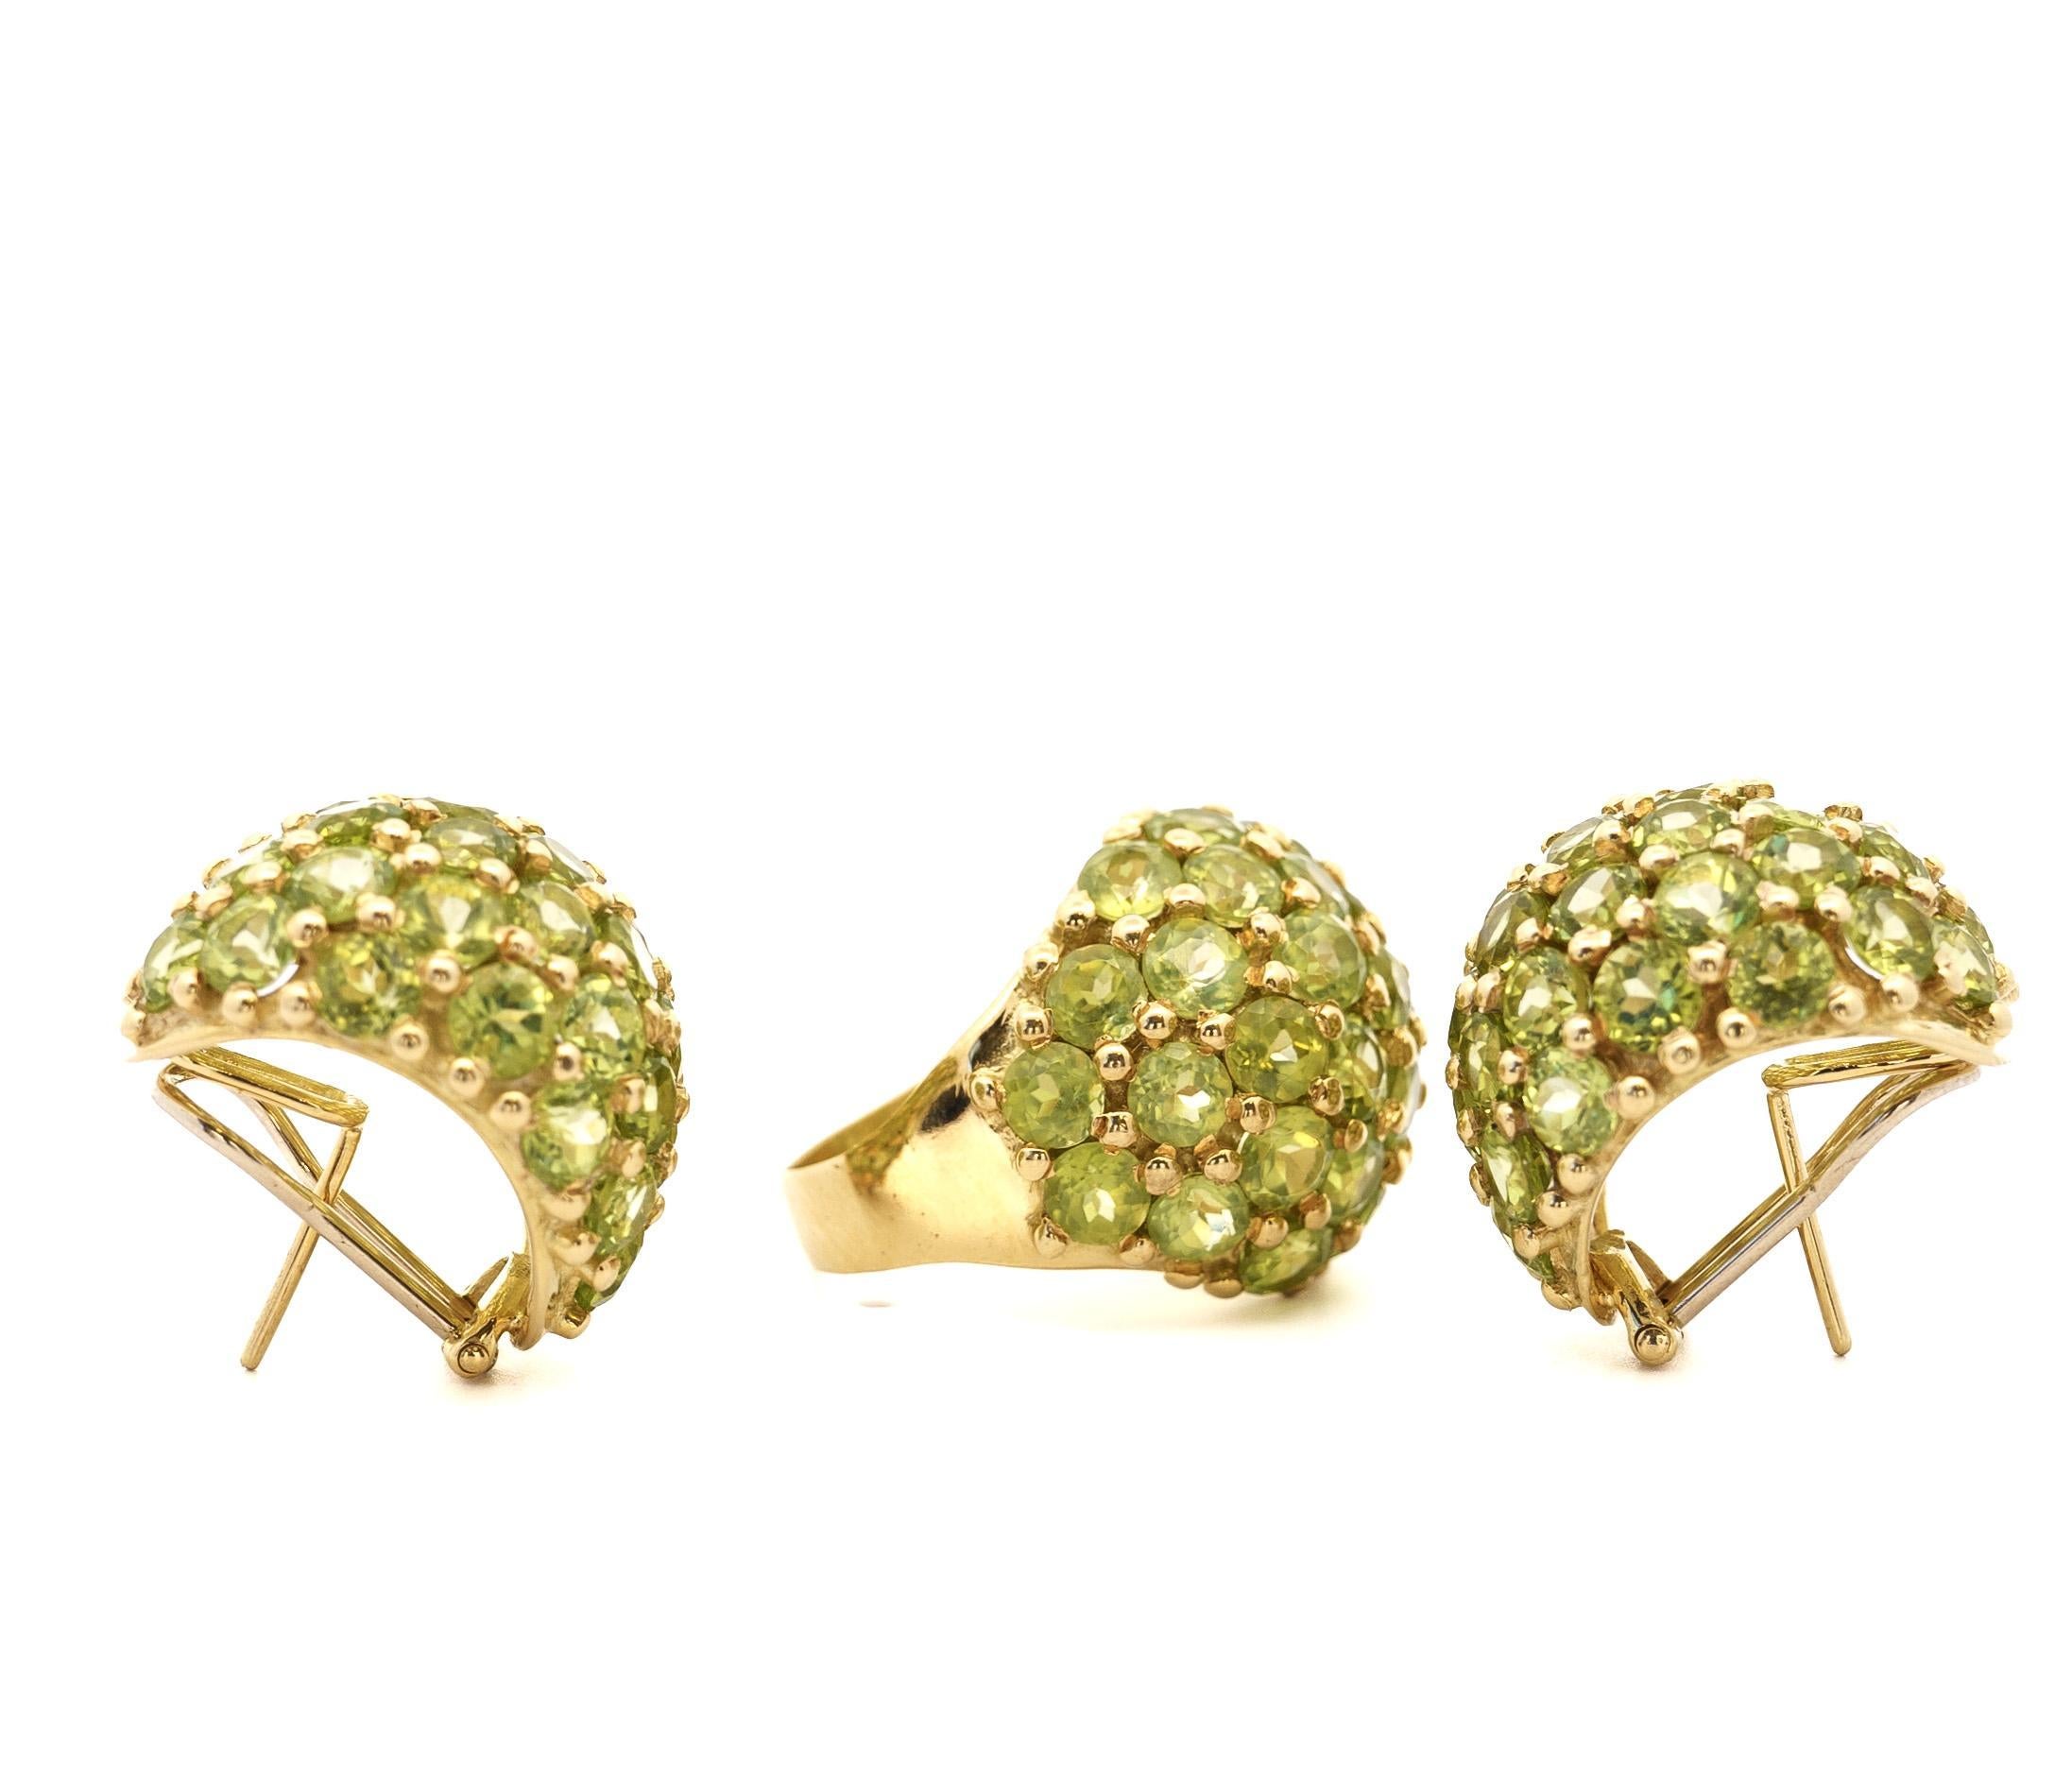 Vintage 25 Carat Peridot Ring & Earring 18K Yellow Gold Jewelry Set For Sale